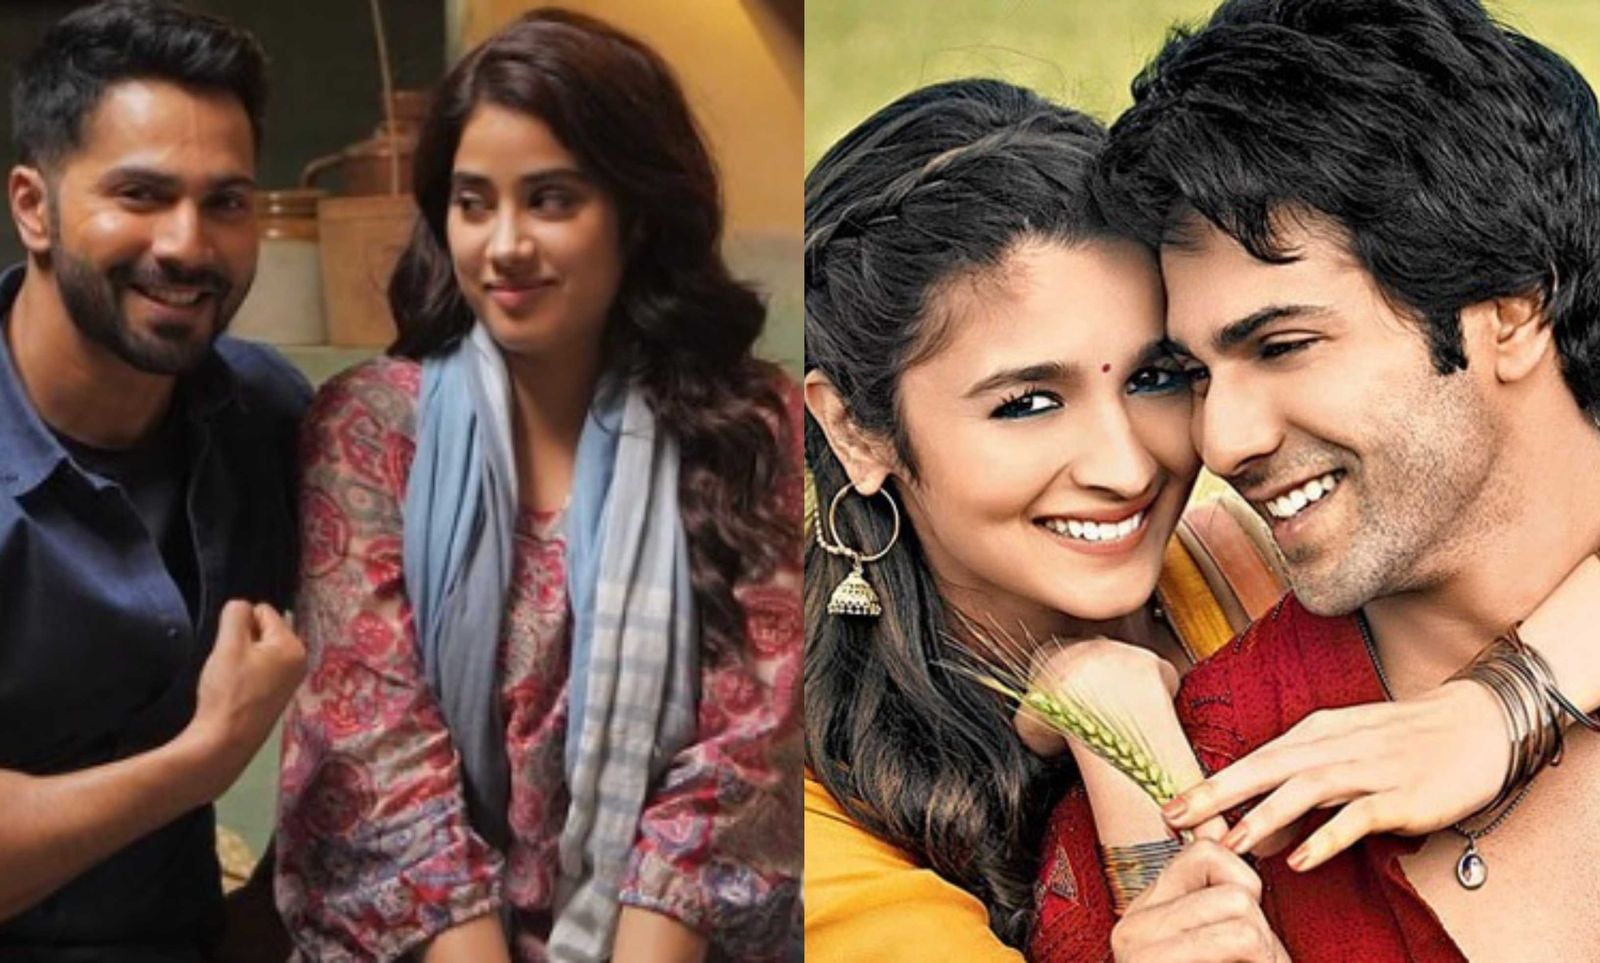 'Gonna be a massive flop': Varun Dhawan to romance Janhvi Kapoor instead of Alia Bhatt in Dulhania 3, fans left angry